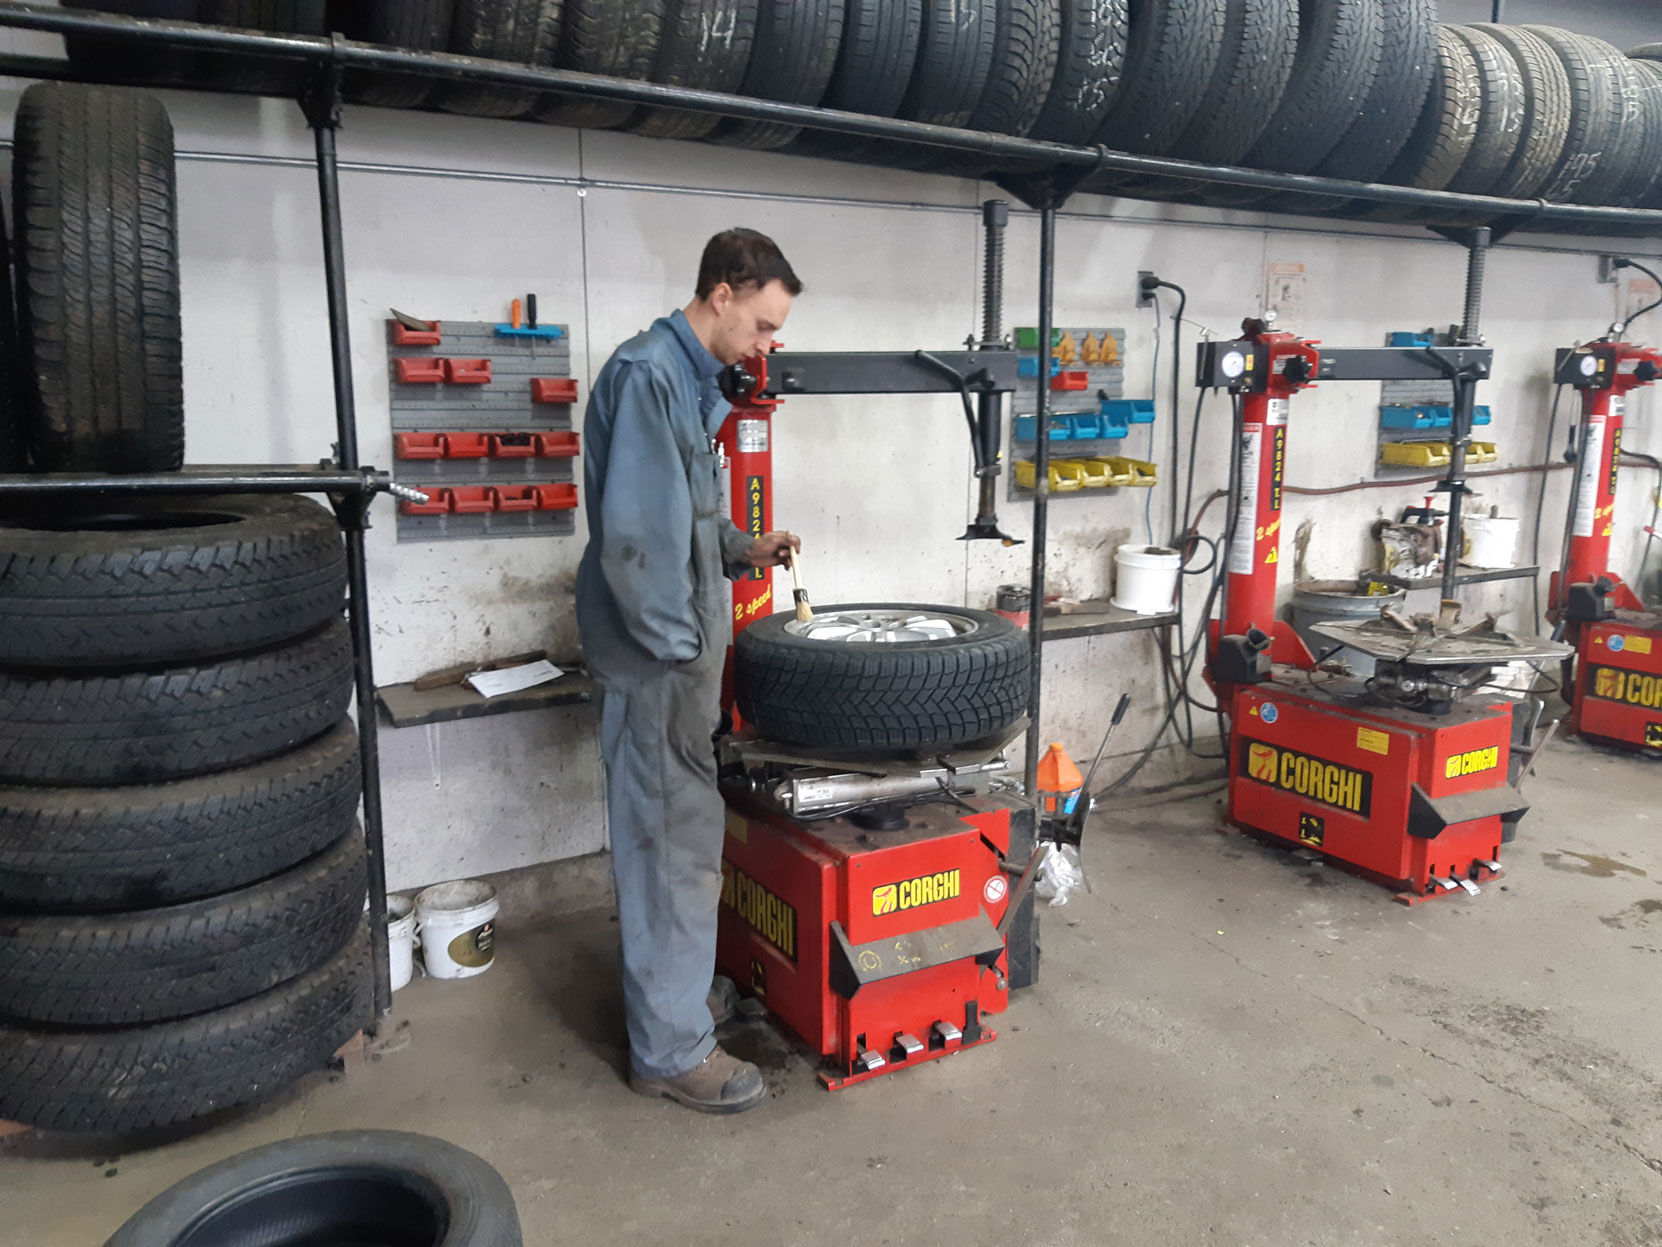 A new set of Michelin winter tires being installed on the rims of our 2020 Prius Prime at Joe's Tire Hospital in Duncan, October 2020 (photo: West Coast Driver Training)